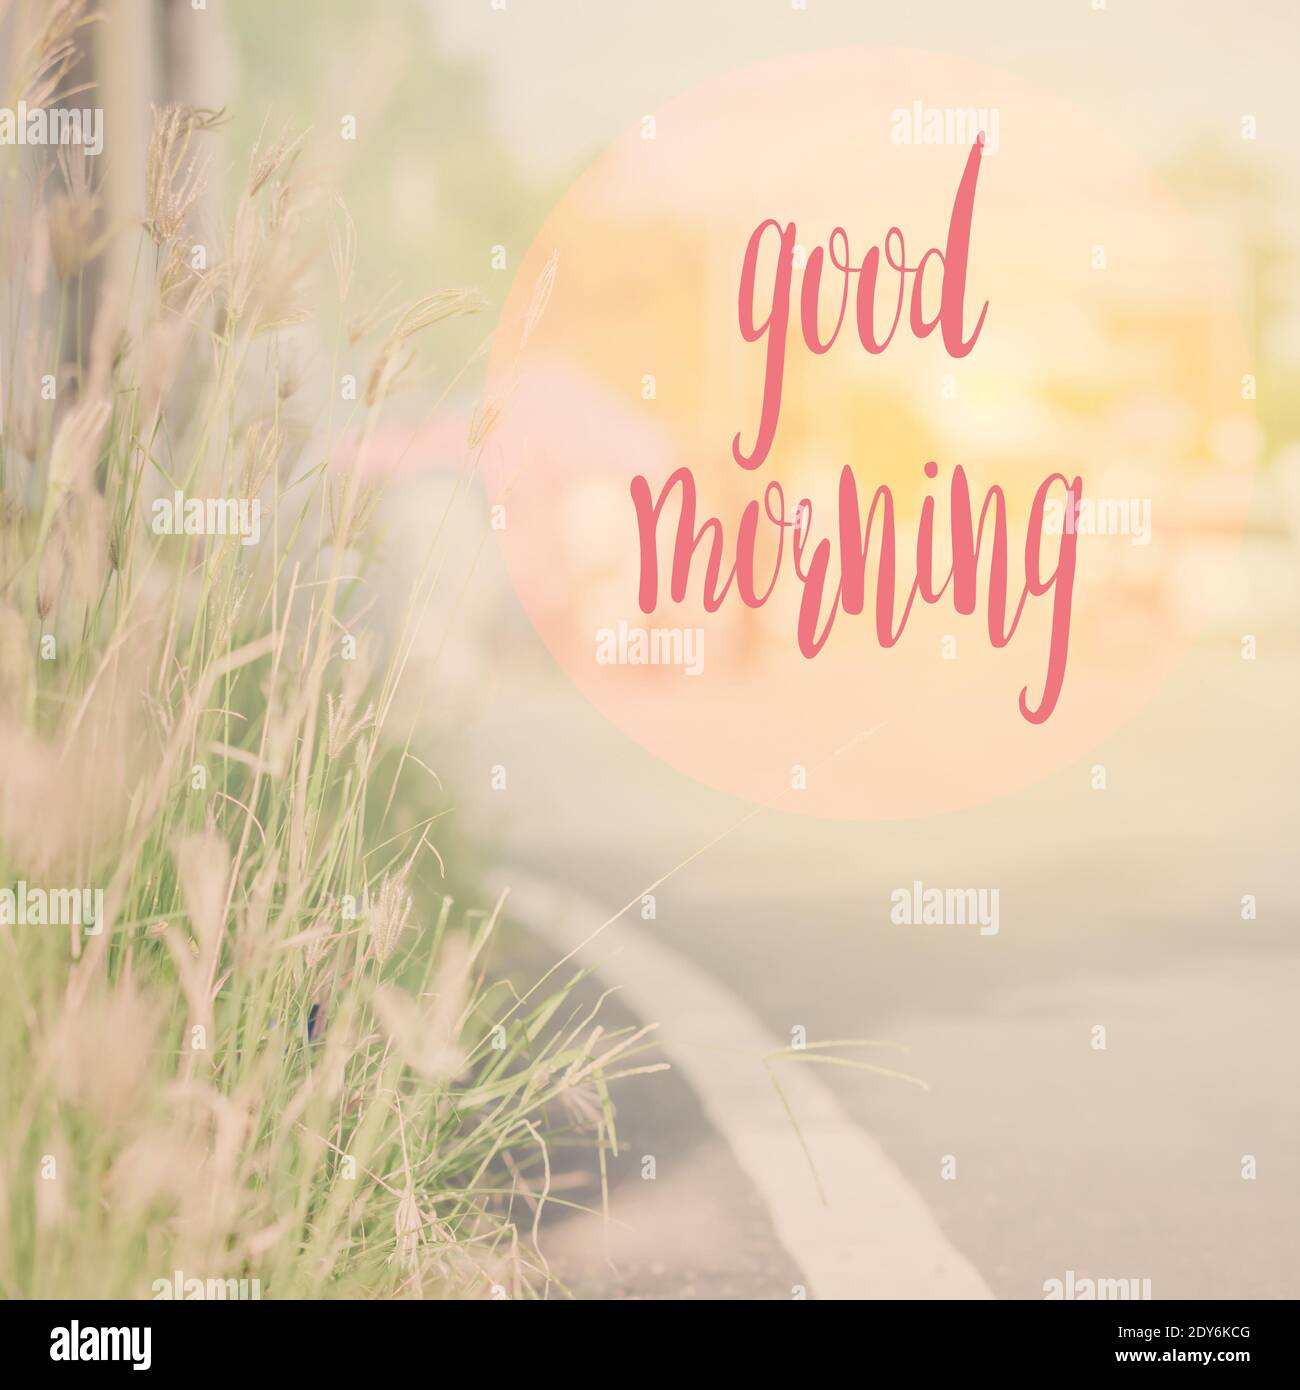 Digital Composite Image Of Good Morning Text Over Road Stock Photo ...